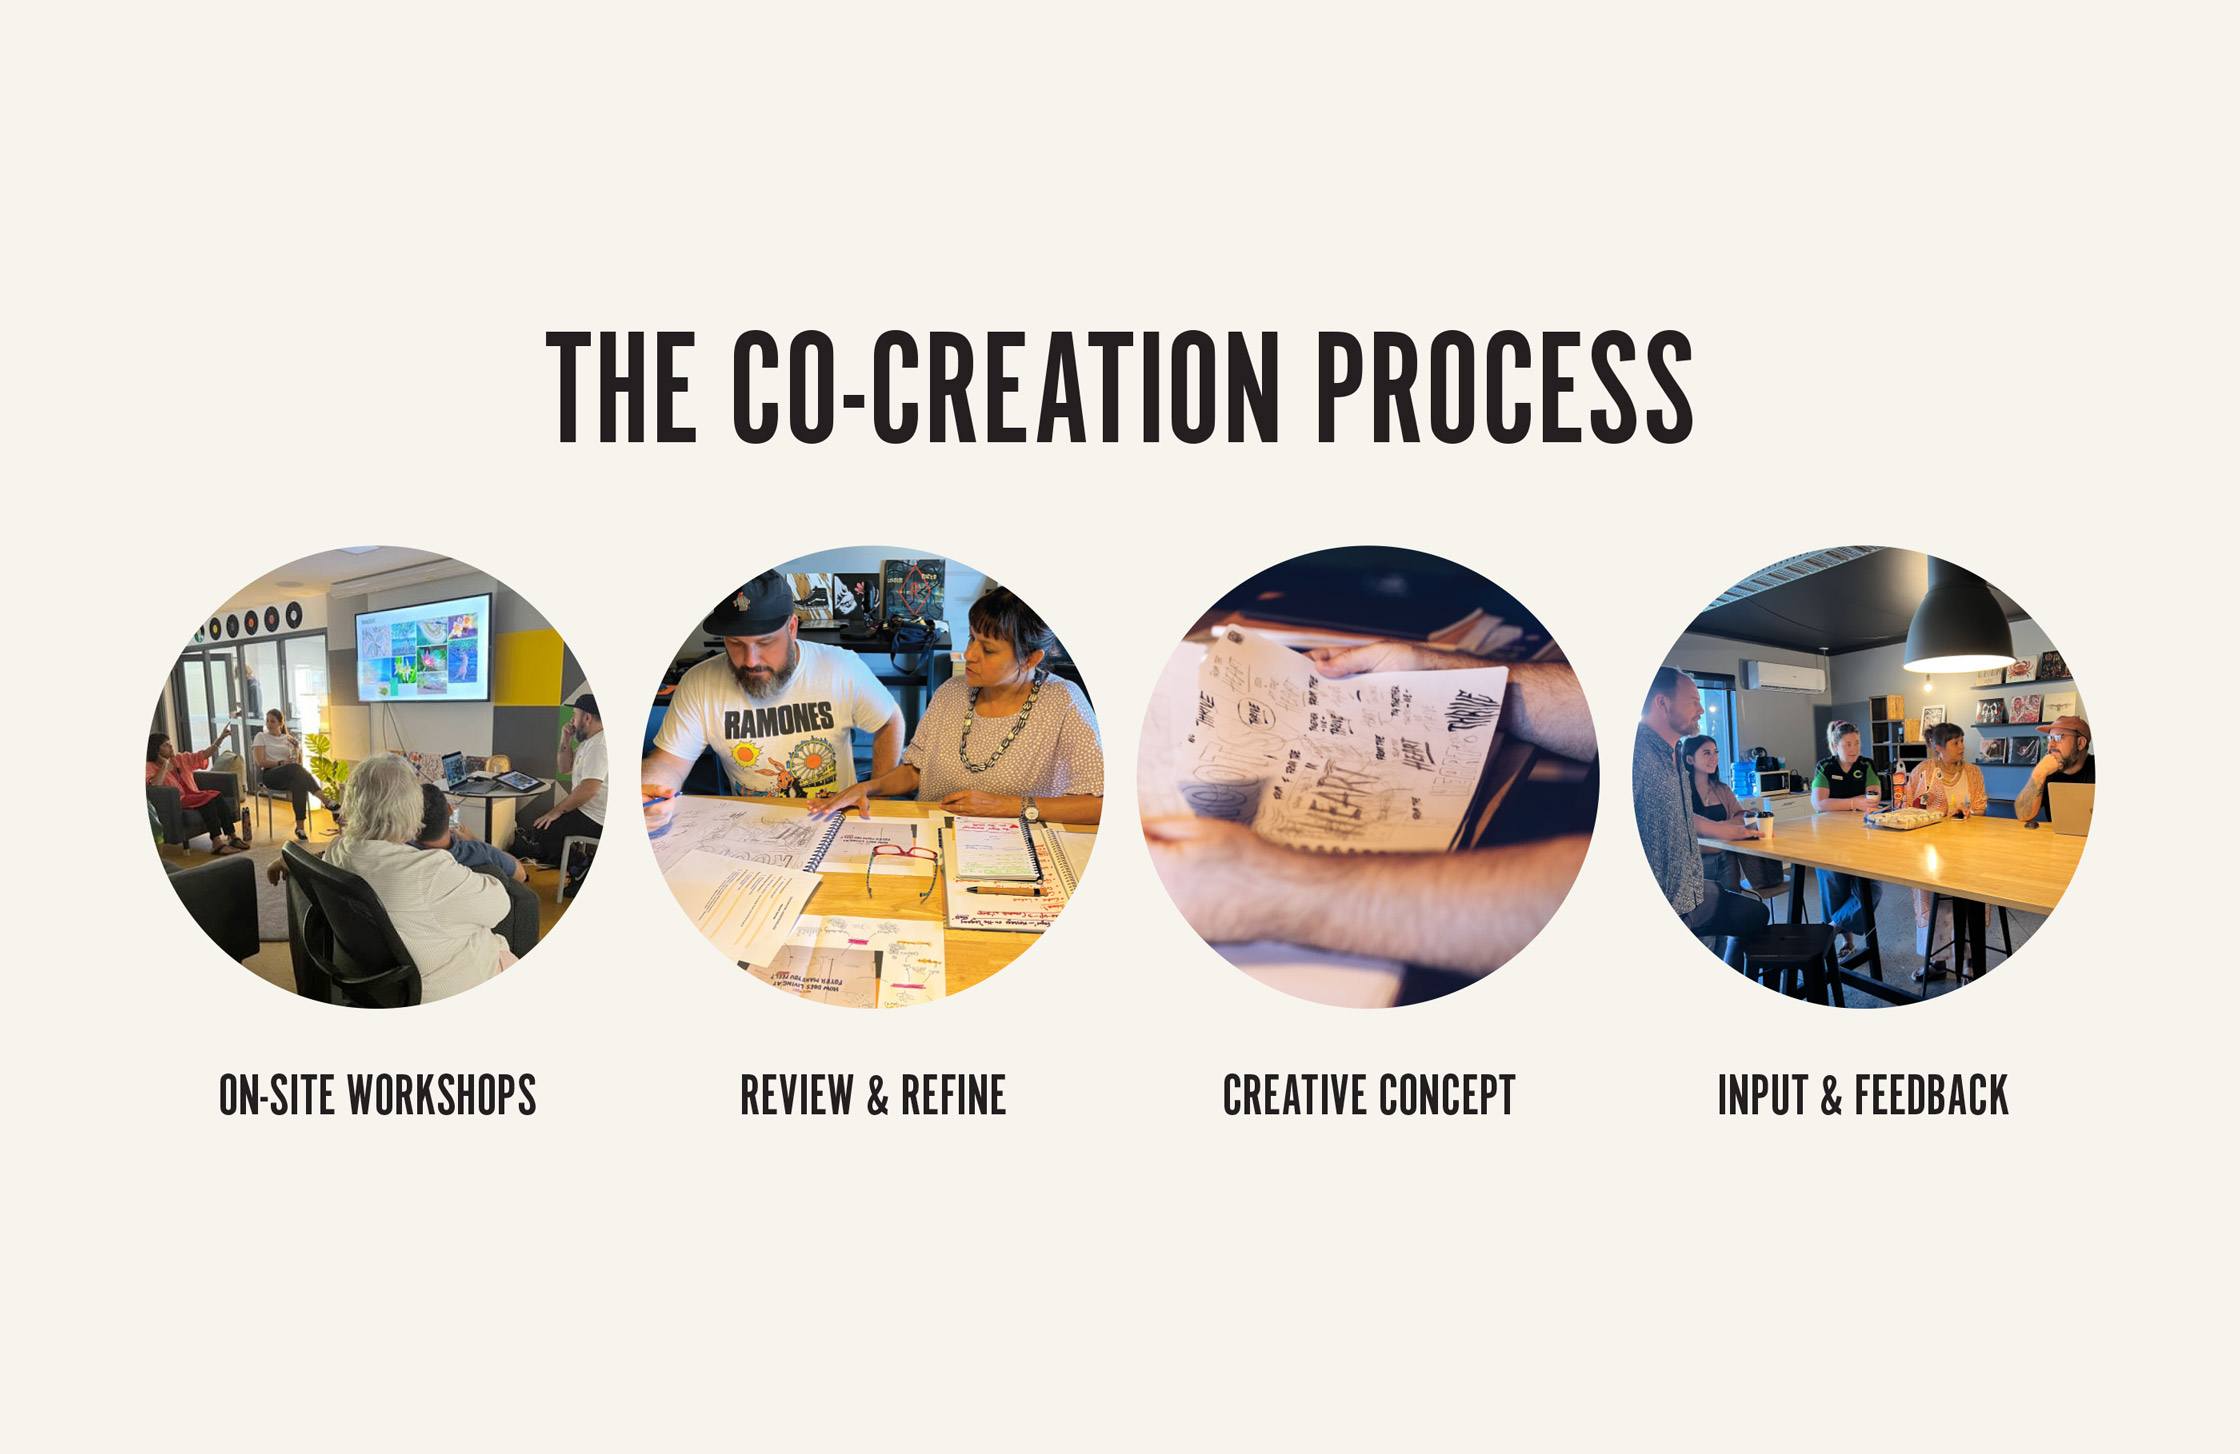 4 images showing the different co-creation settings across the project timeline